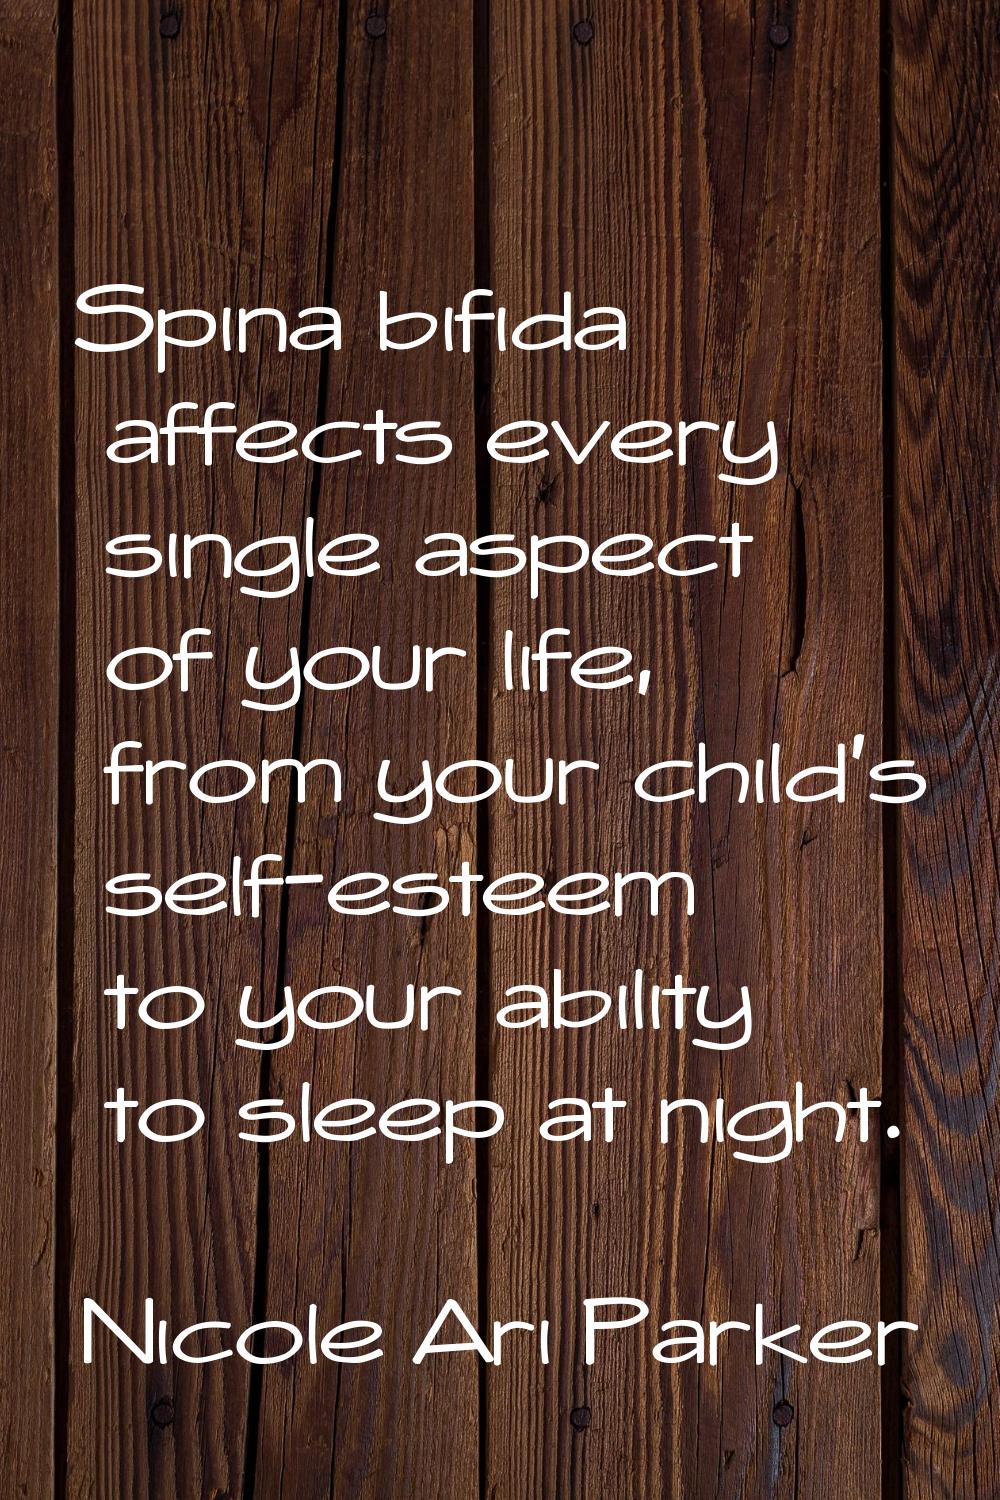 Spina bifida affects every single aspect of your life, from your child's self-esteem to your abilit